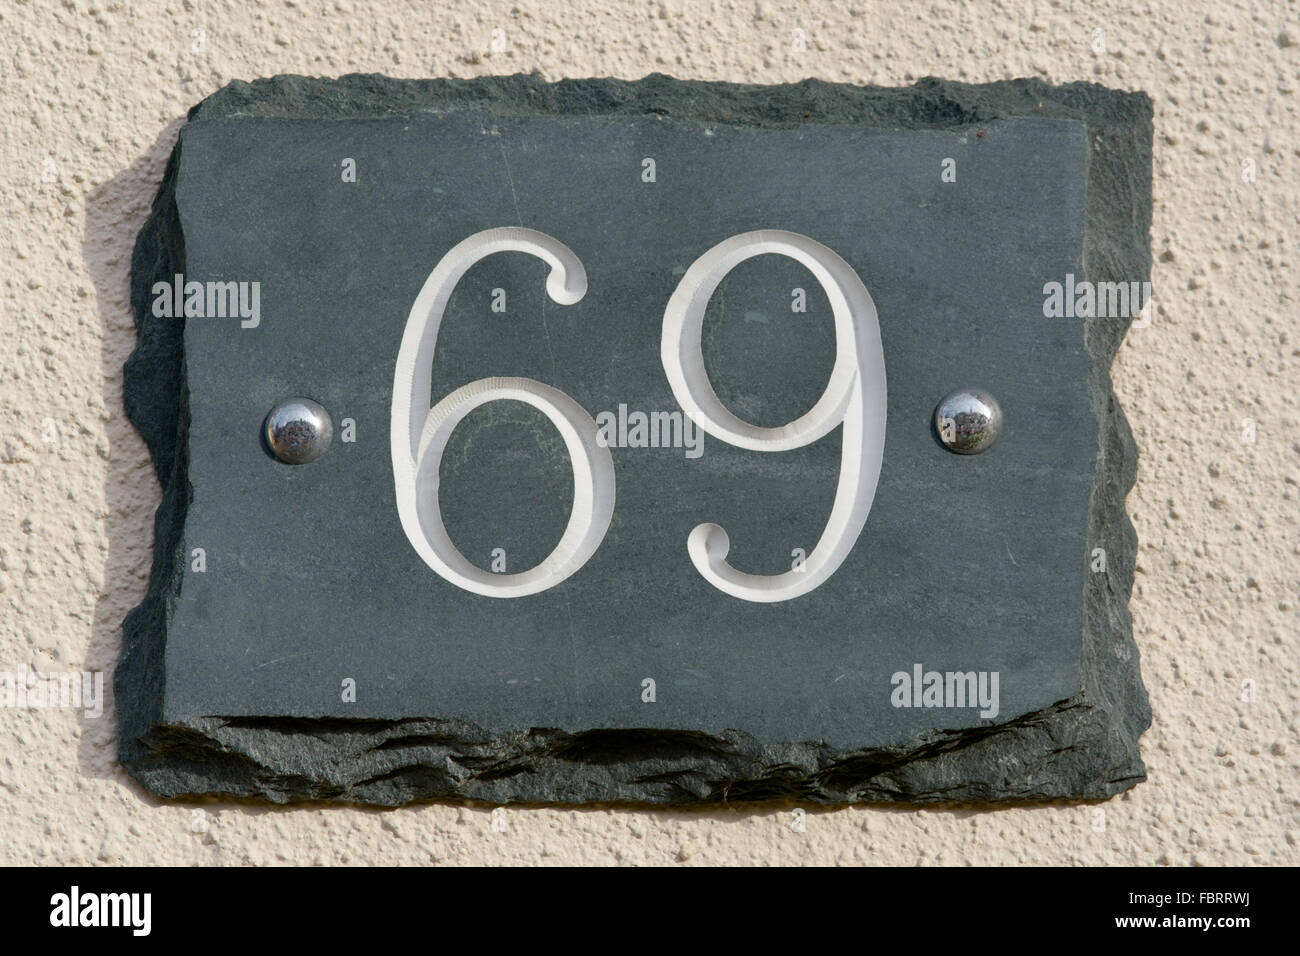 House number 69 sign Stock Photo